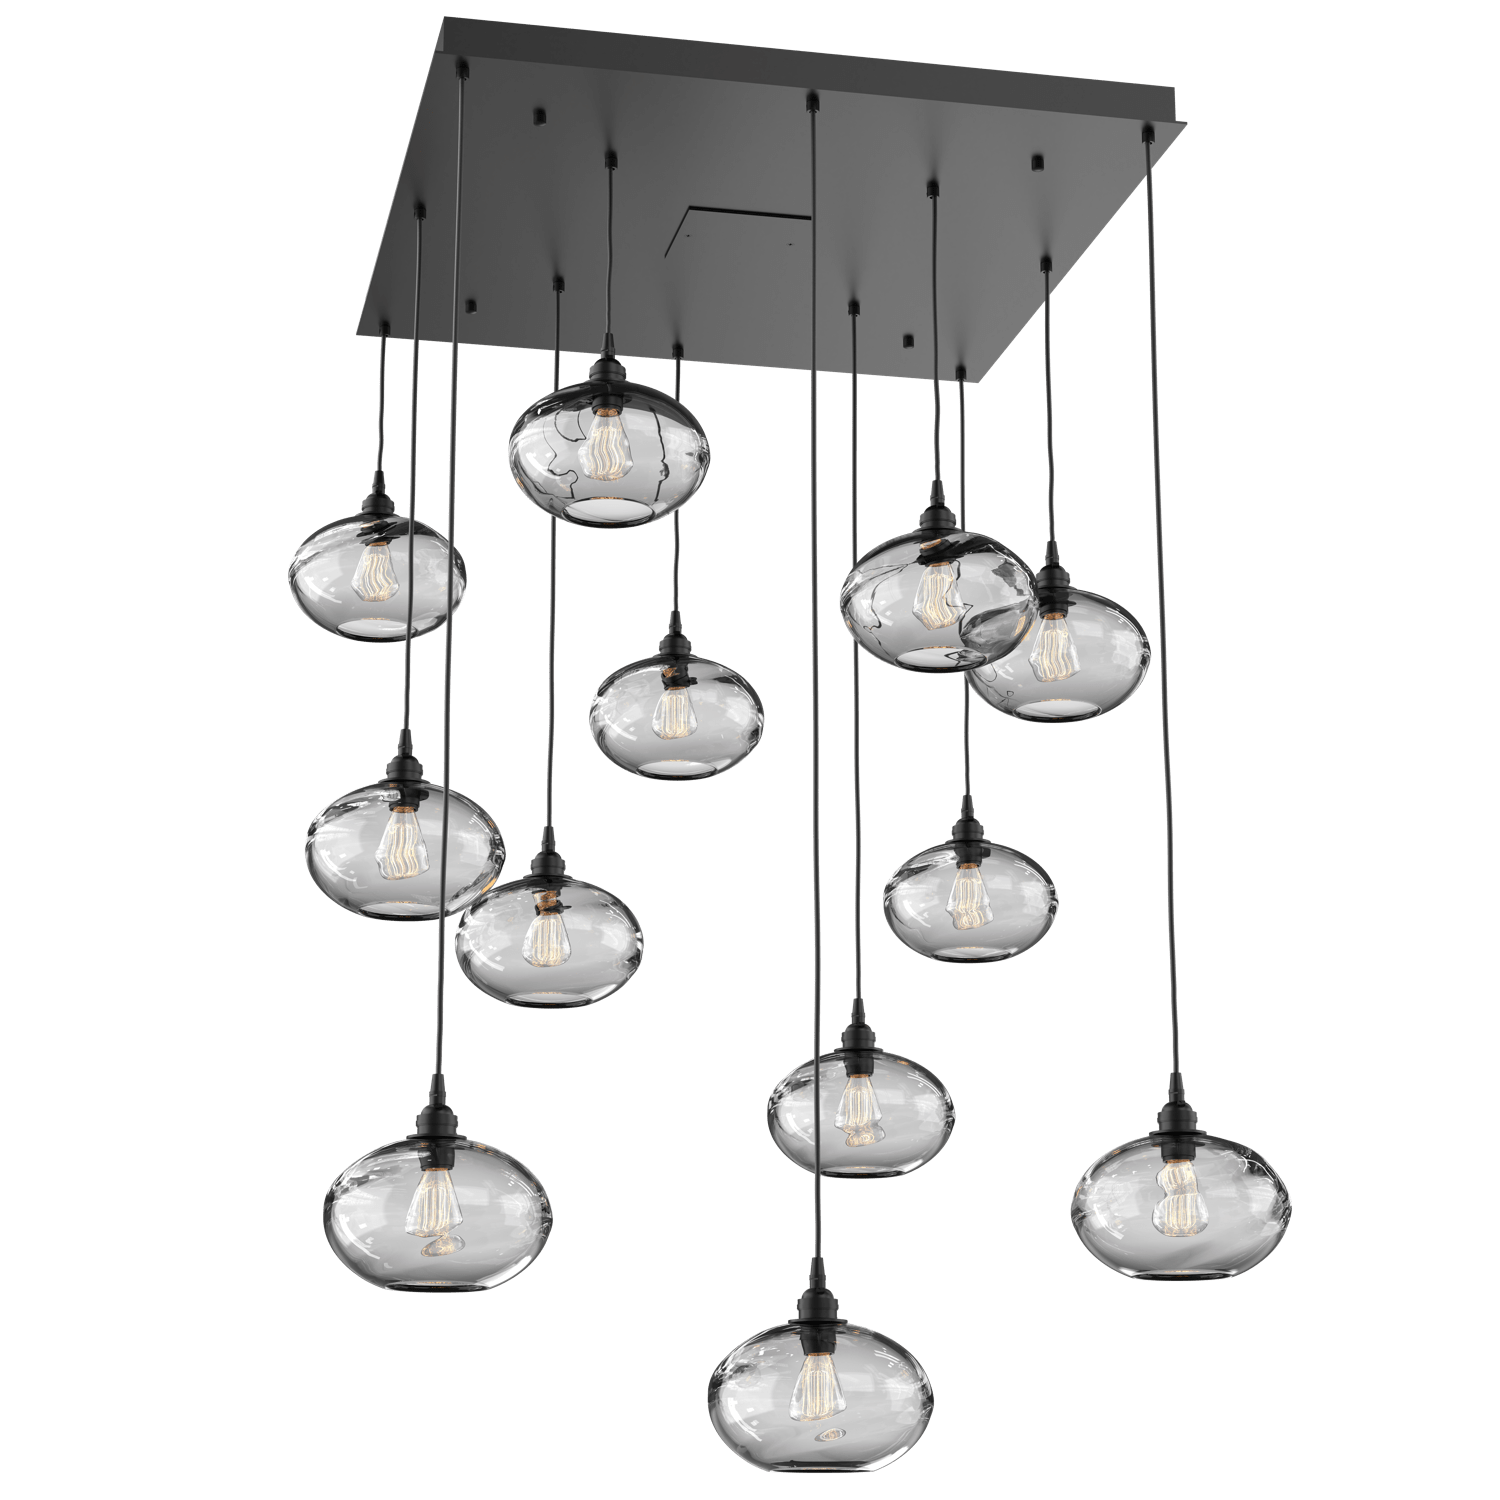 CHB0036-12-MB-OC-Hammerton-Studio-Optic-Blown-Glass-Coppa-12-light-square-pendant-chandelier-with-matte-black-finish-and-optic-clear-blown-glass-shades-and-incandescent-lamping